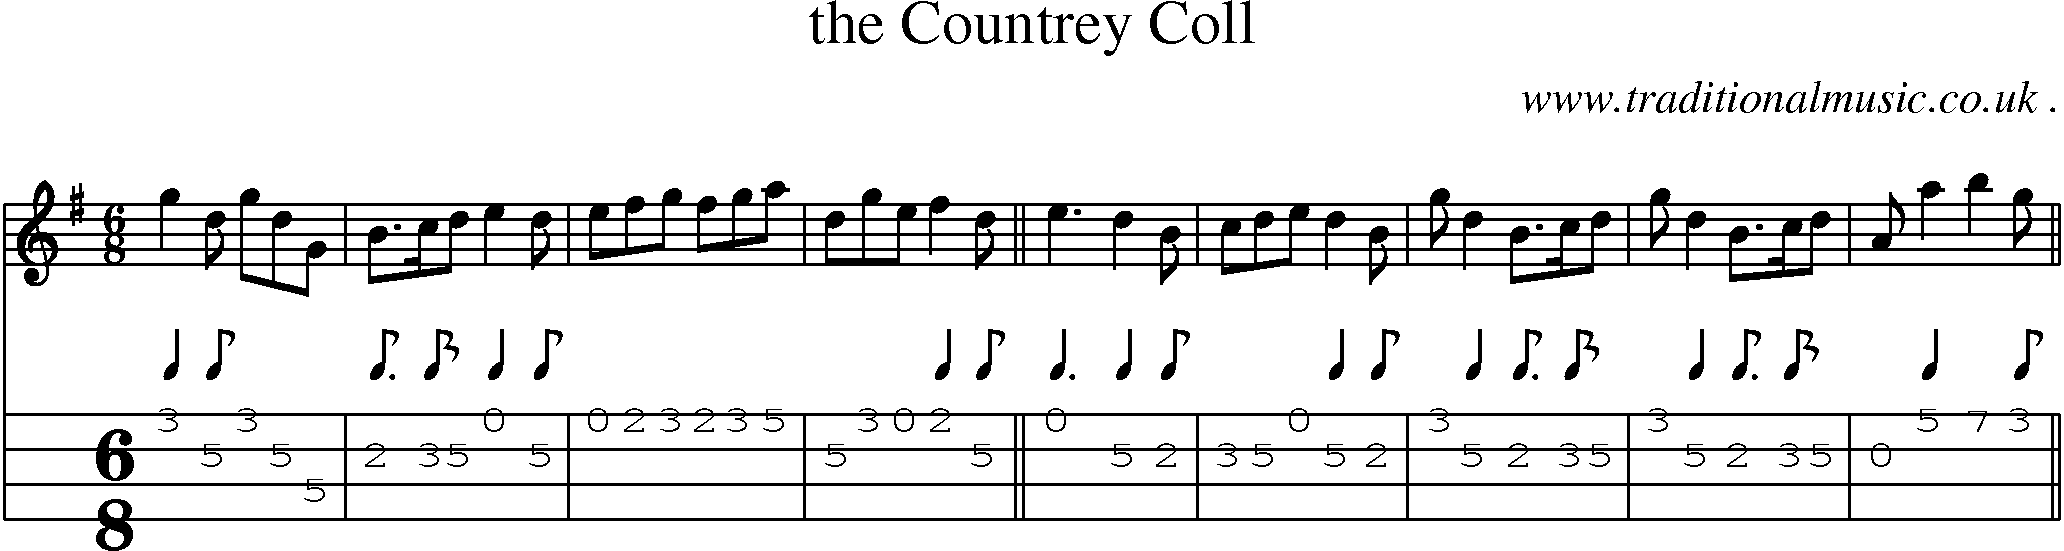 Sheet-music  score, Chords and Mandolin Tabs for The Countrey Coll